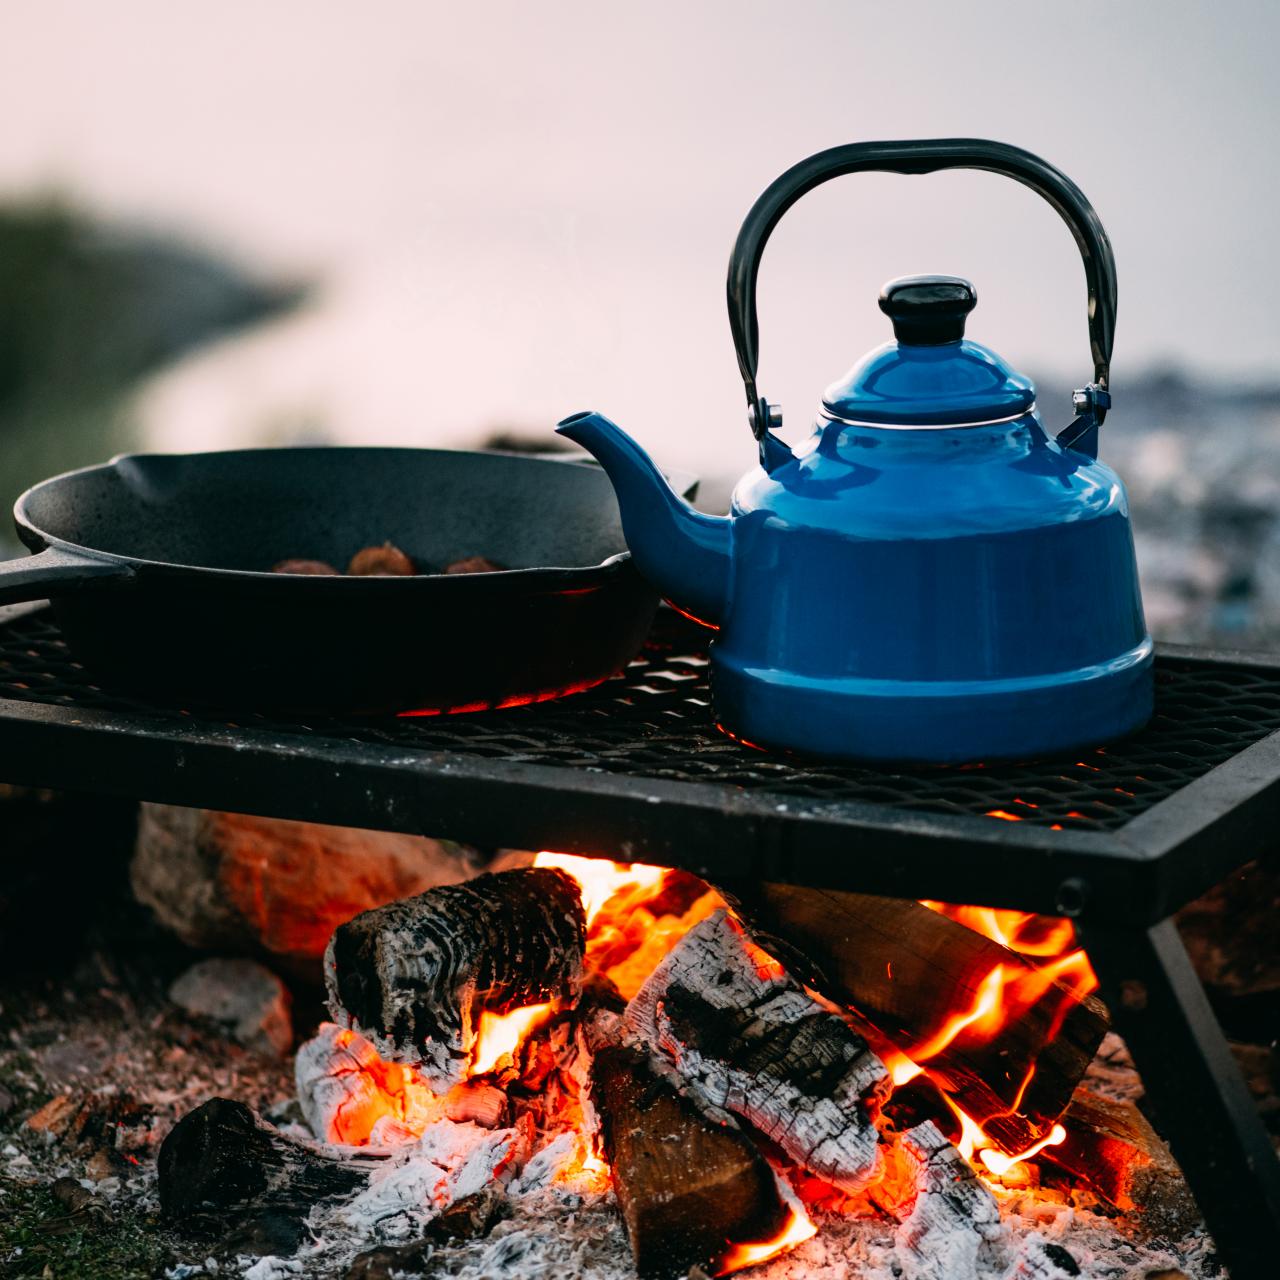 Best Camping Tea Kettles for Easy Outdoor Cooking